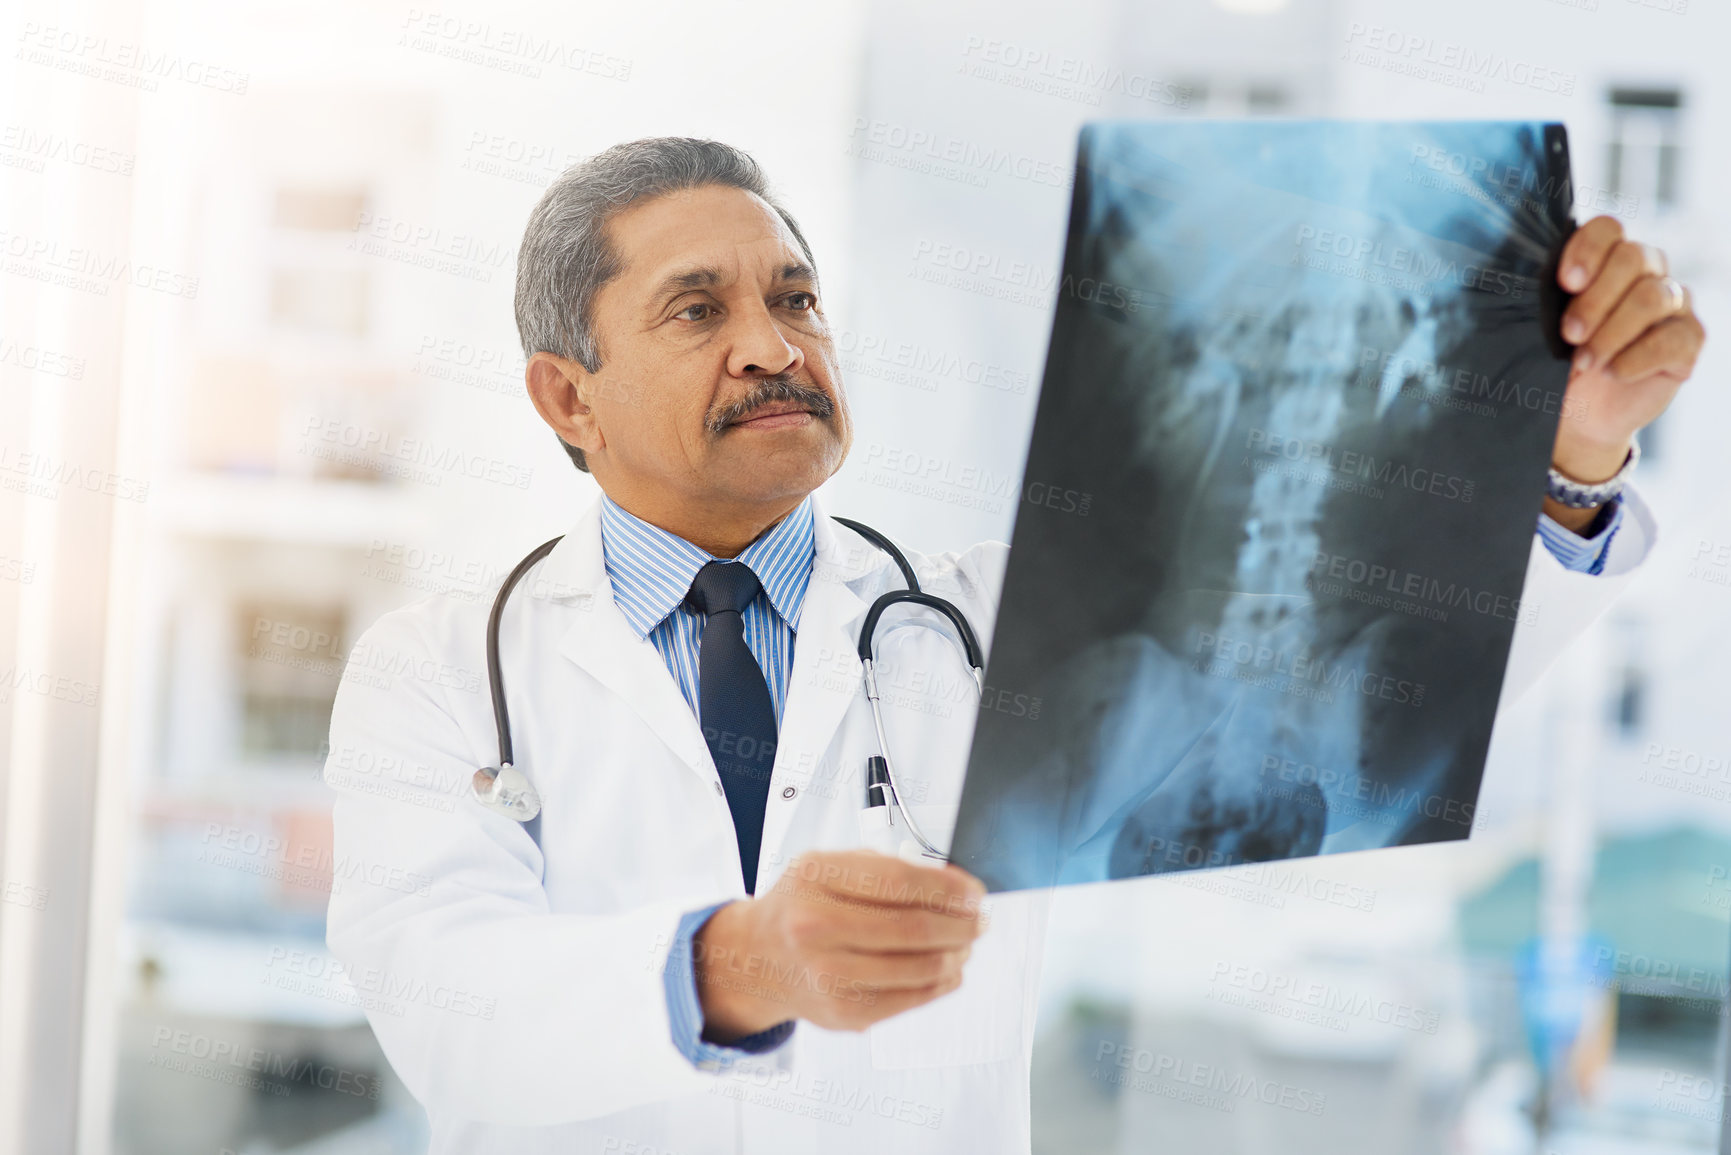 Buy stock photo Shot of a mature doctor looking at an x ray